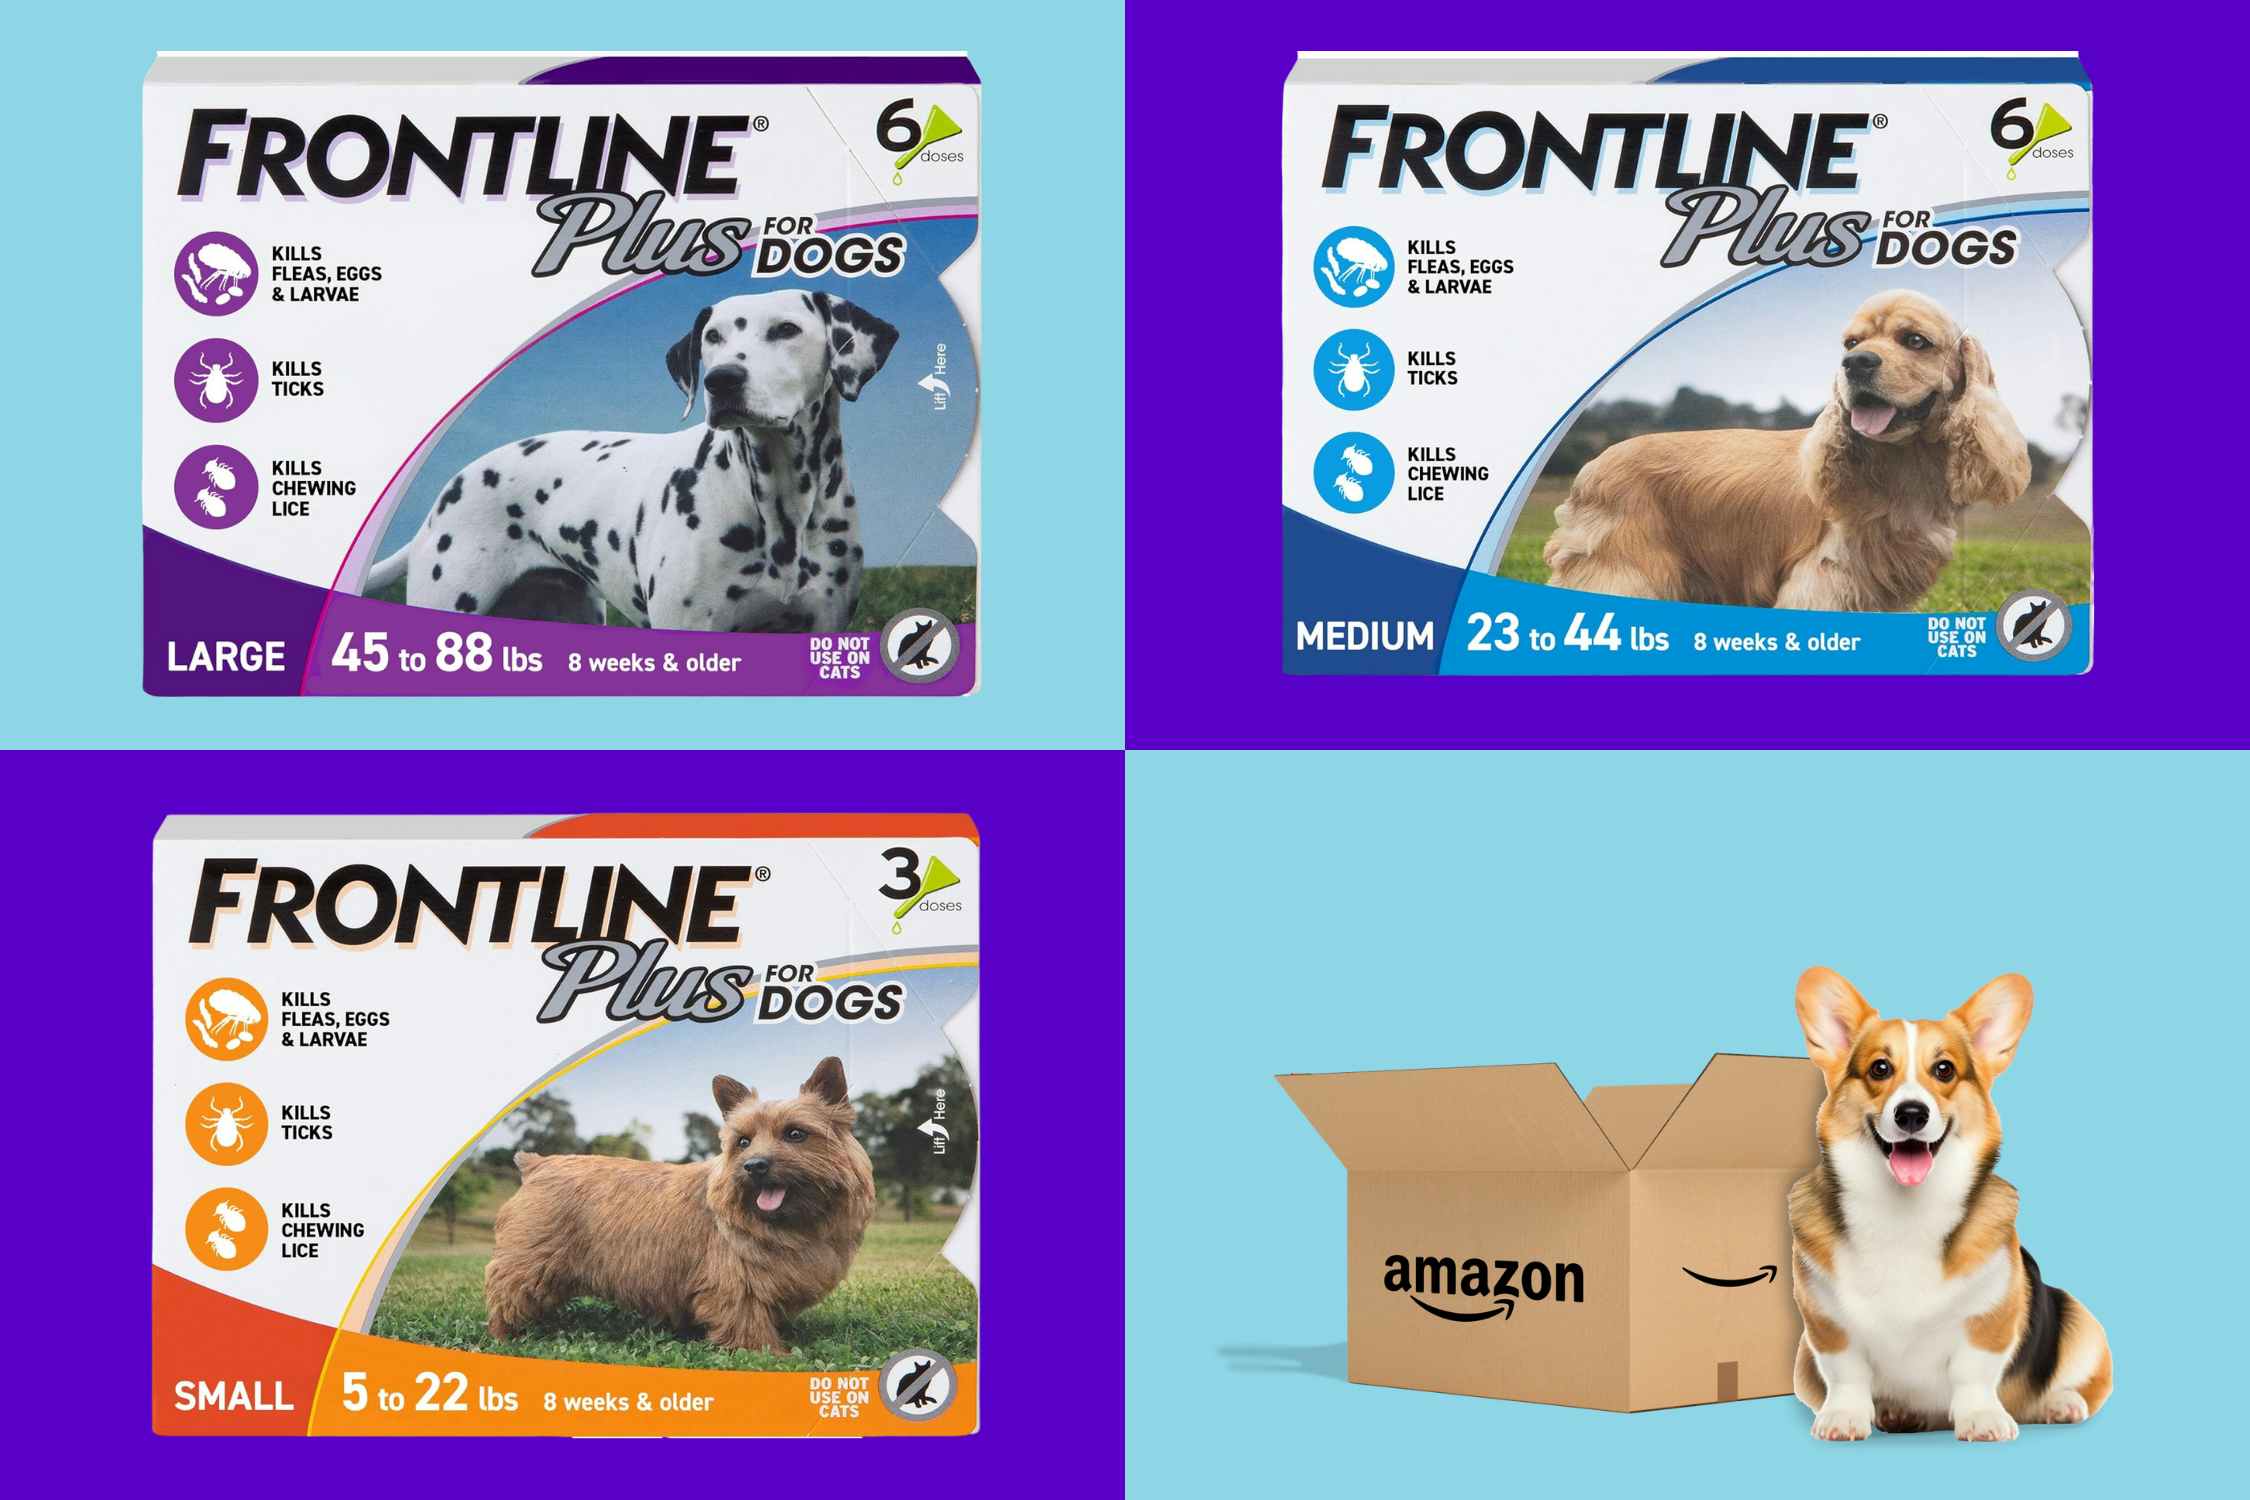 Frontline Plus Flea and Tick Treatments, as Low as $21.90 on Amazon (Save 56%)